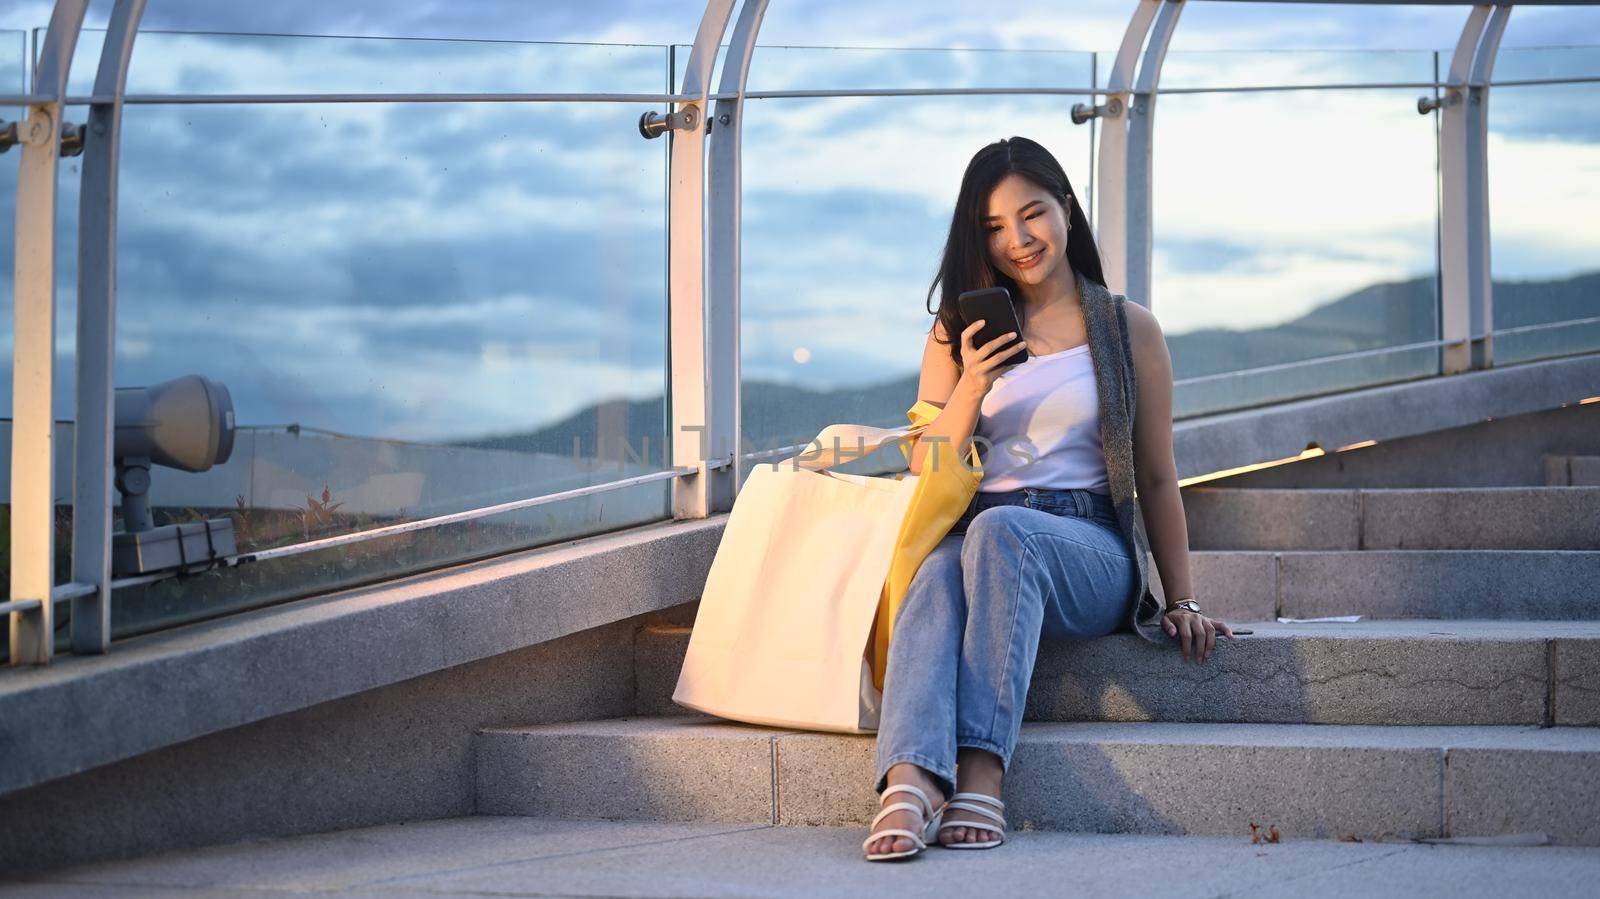 Pretty asian woman sitting using mobile phone and sitting on stairs at terrace with beautiful evening sky in background.